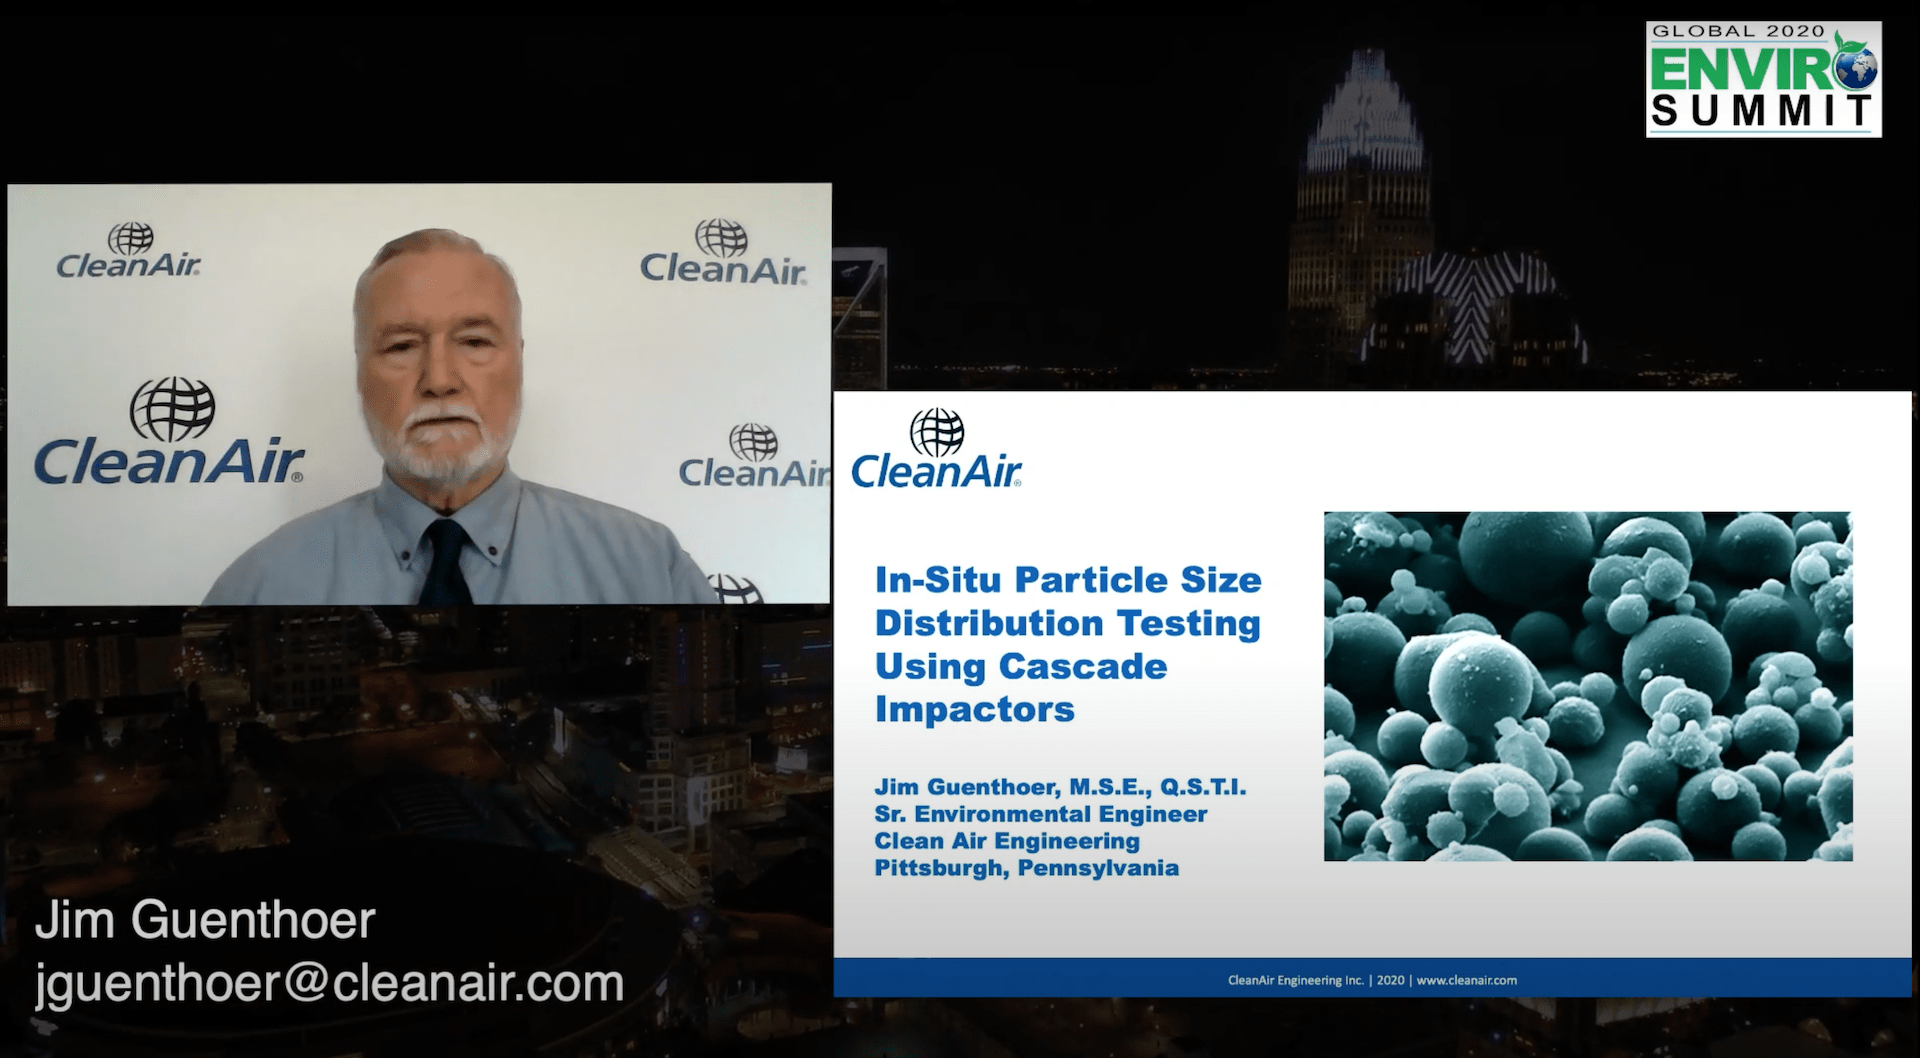 In-Situ Particle Size Distribution Testing Using Cascade Impactors